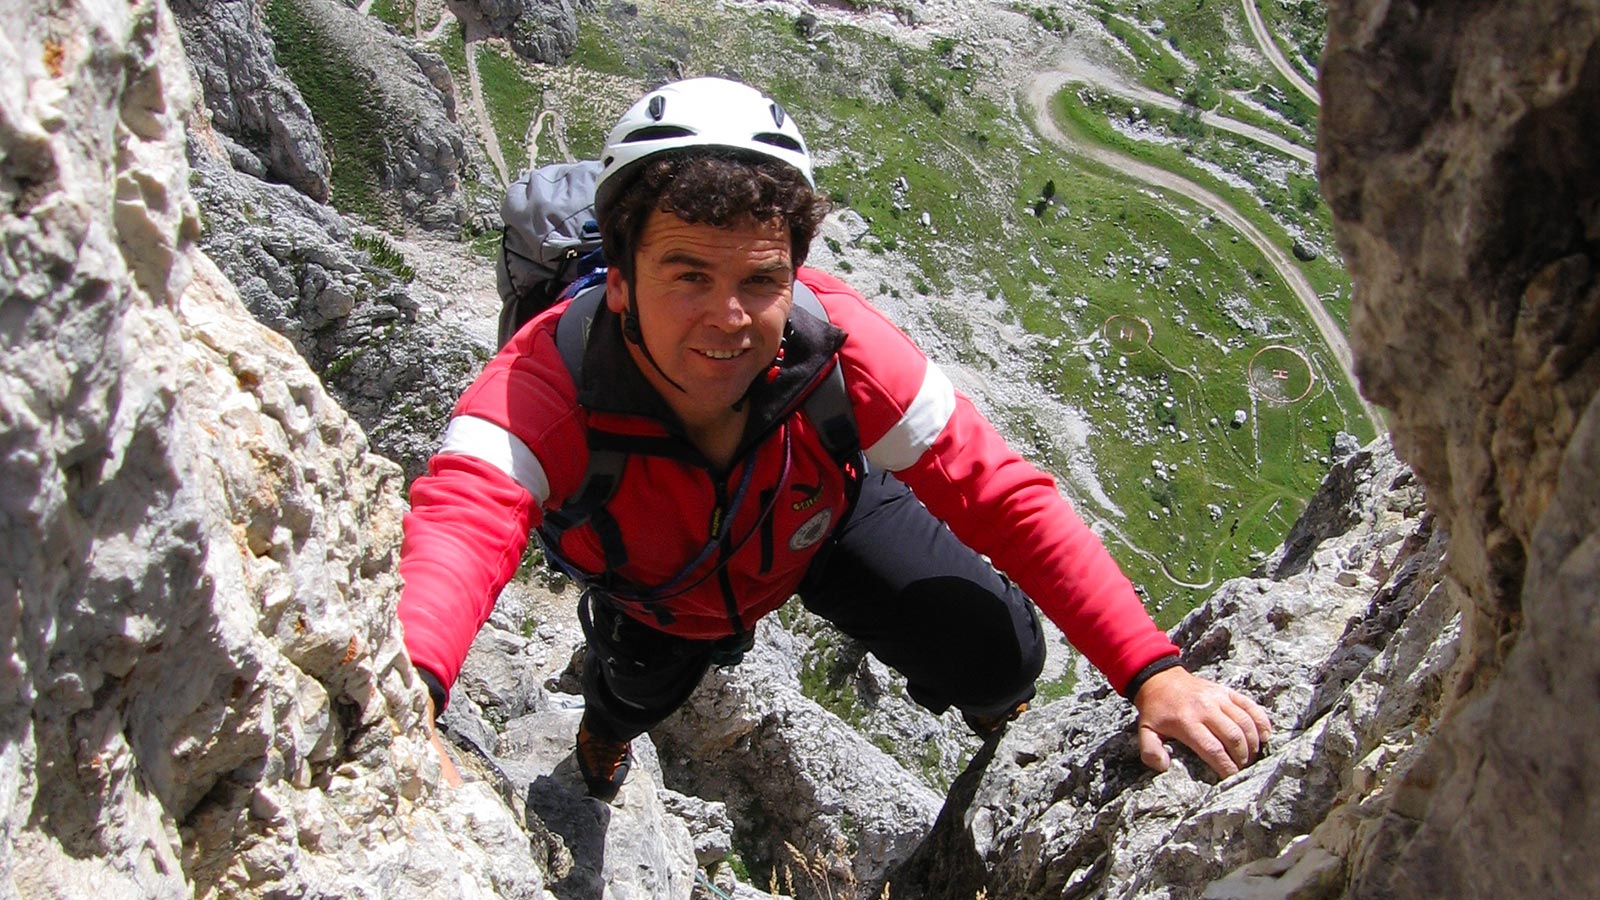 Climber during an excursion in Val Casies with backpack, helmet and safety rope